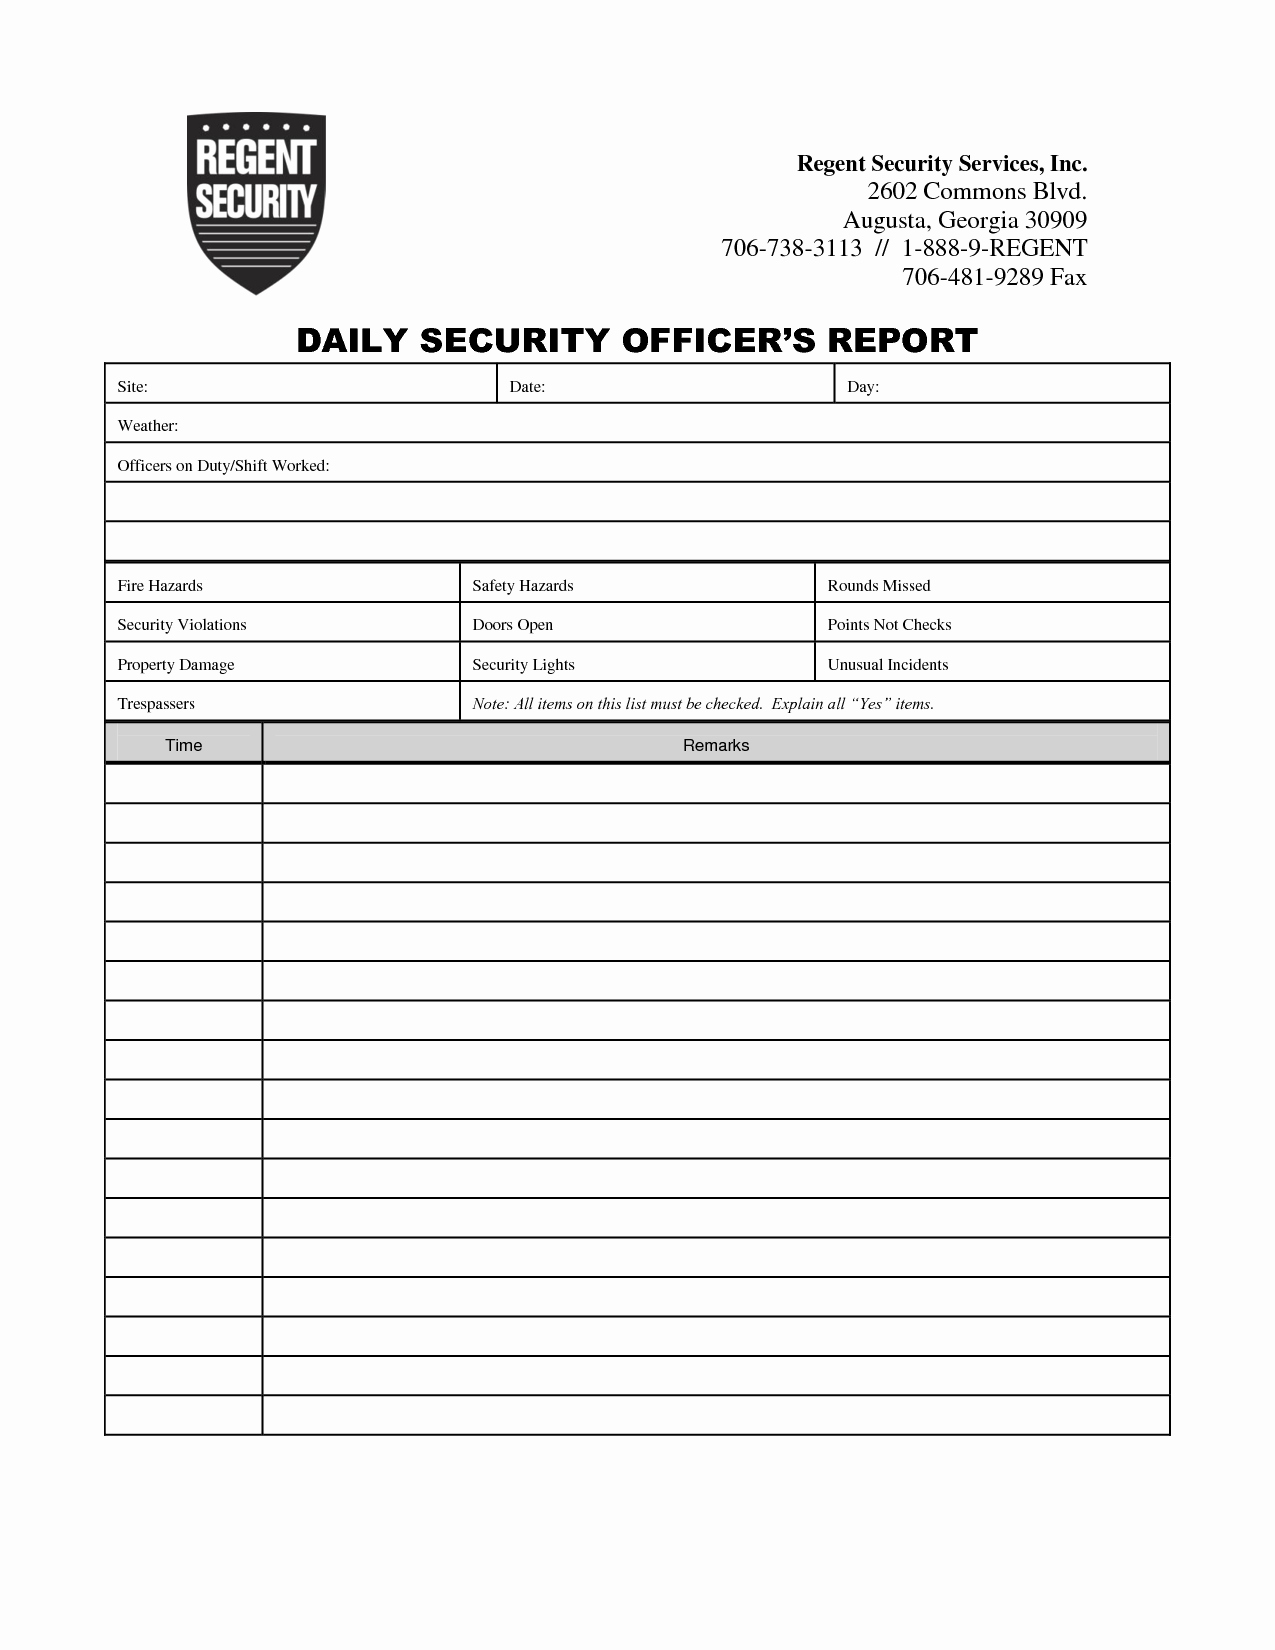 Security Incident Report Template Best Of Security Guard Daily Activity Report Template